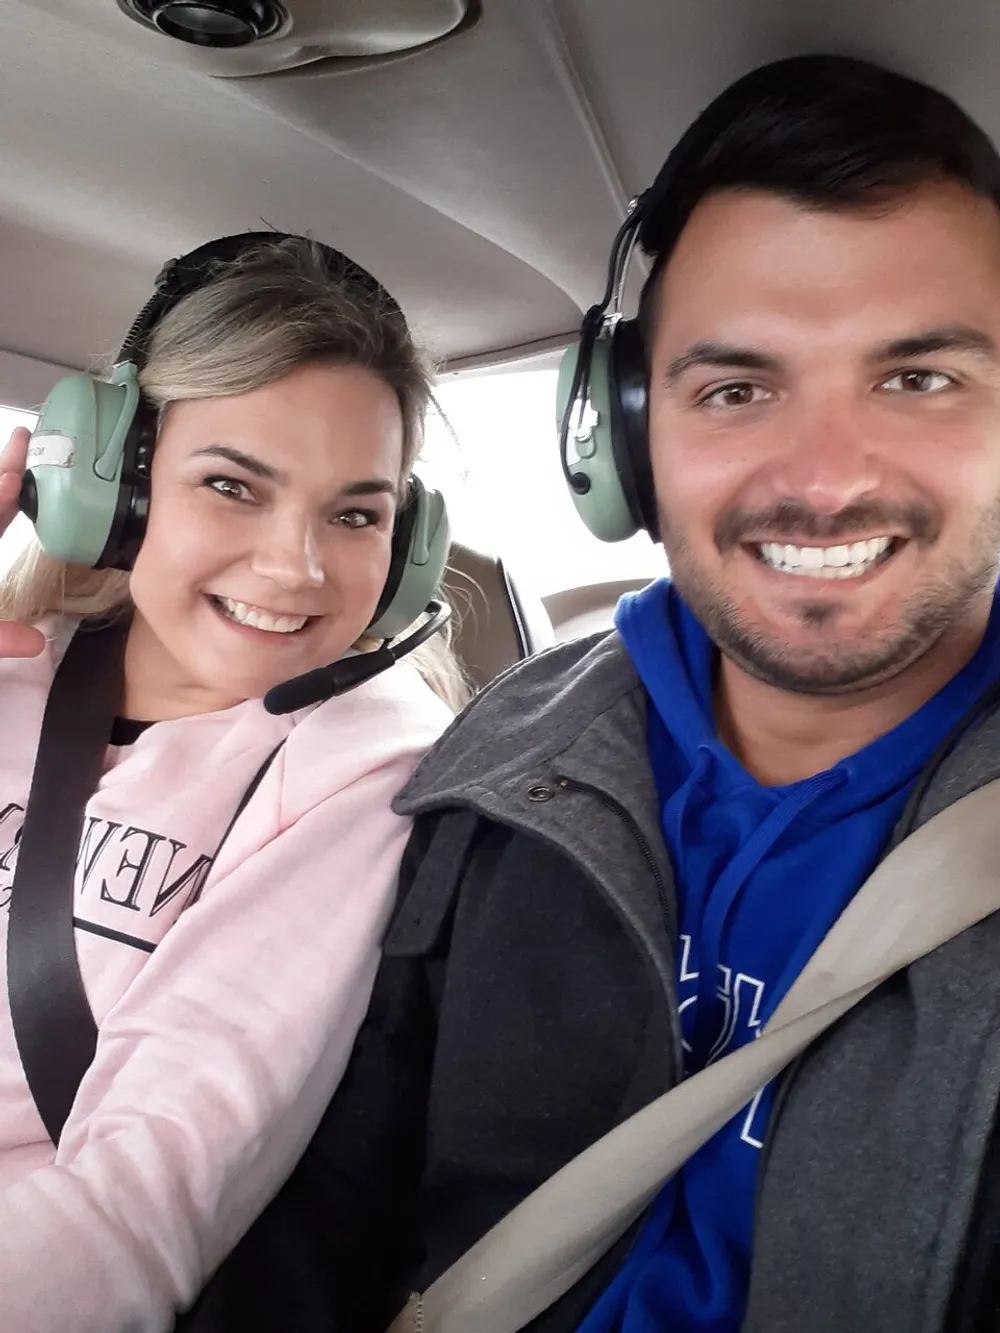 A man and a woman are smiling for a selfie while wearing aviation headsets possibly sitting inside an aircraft